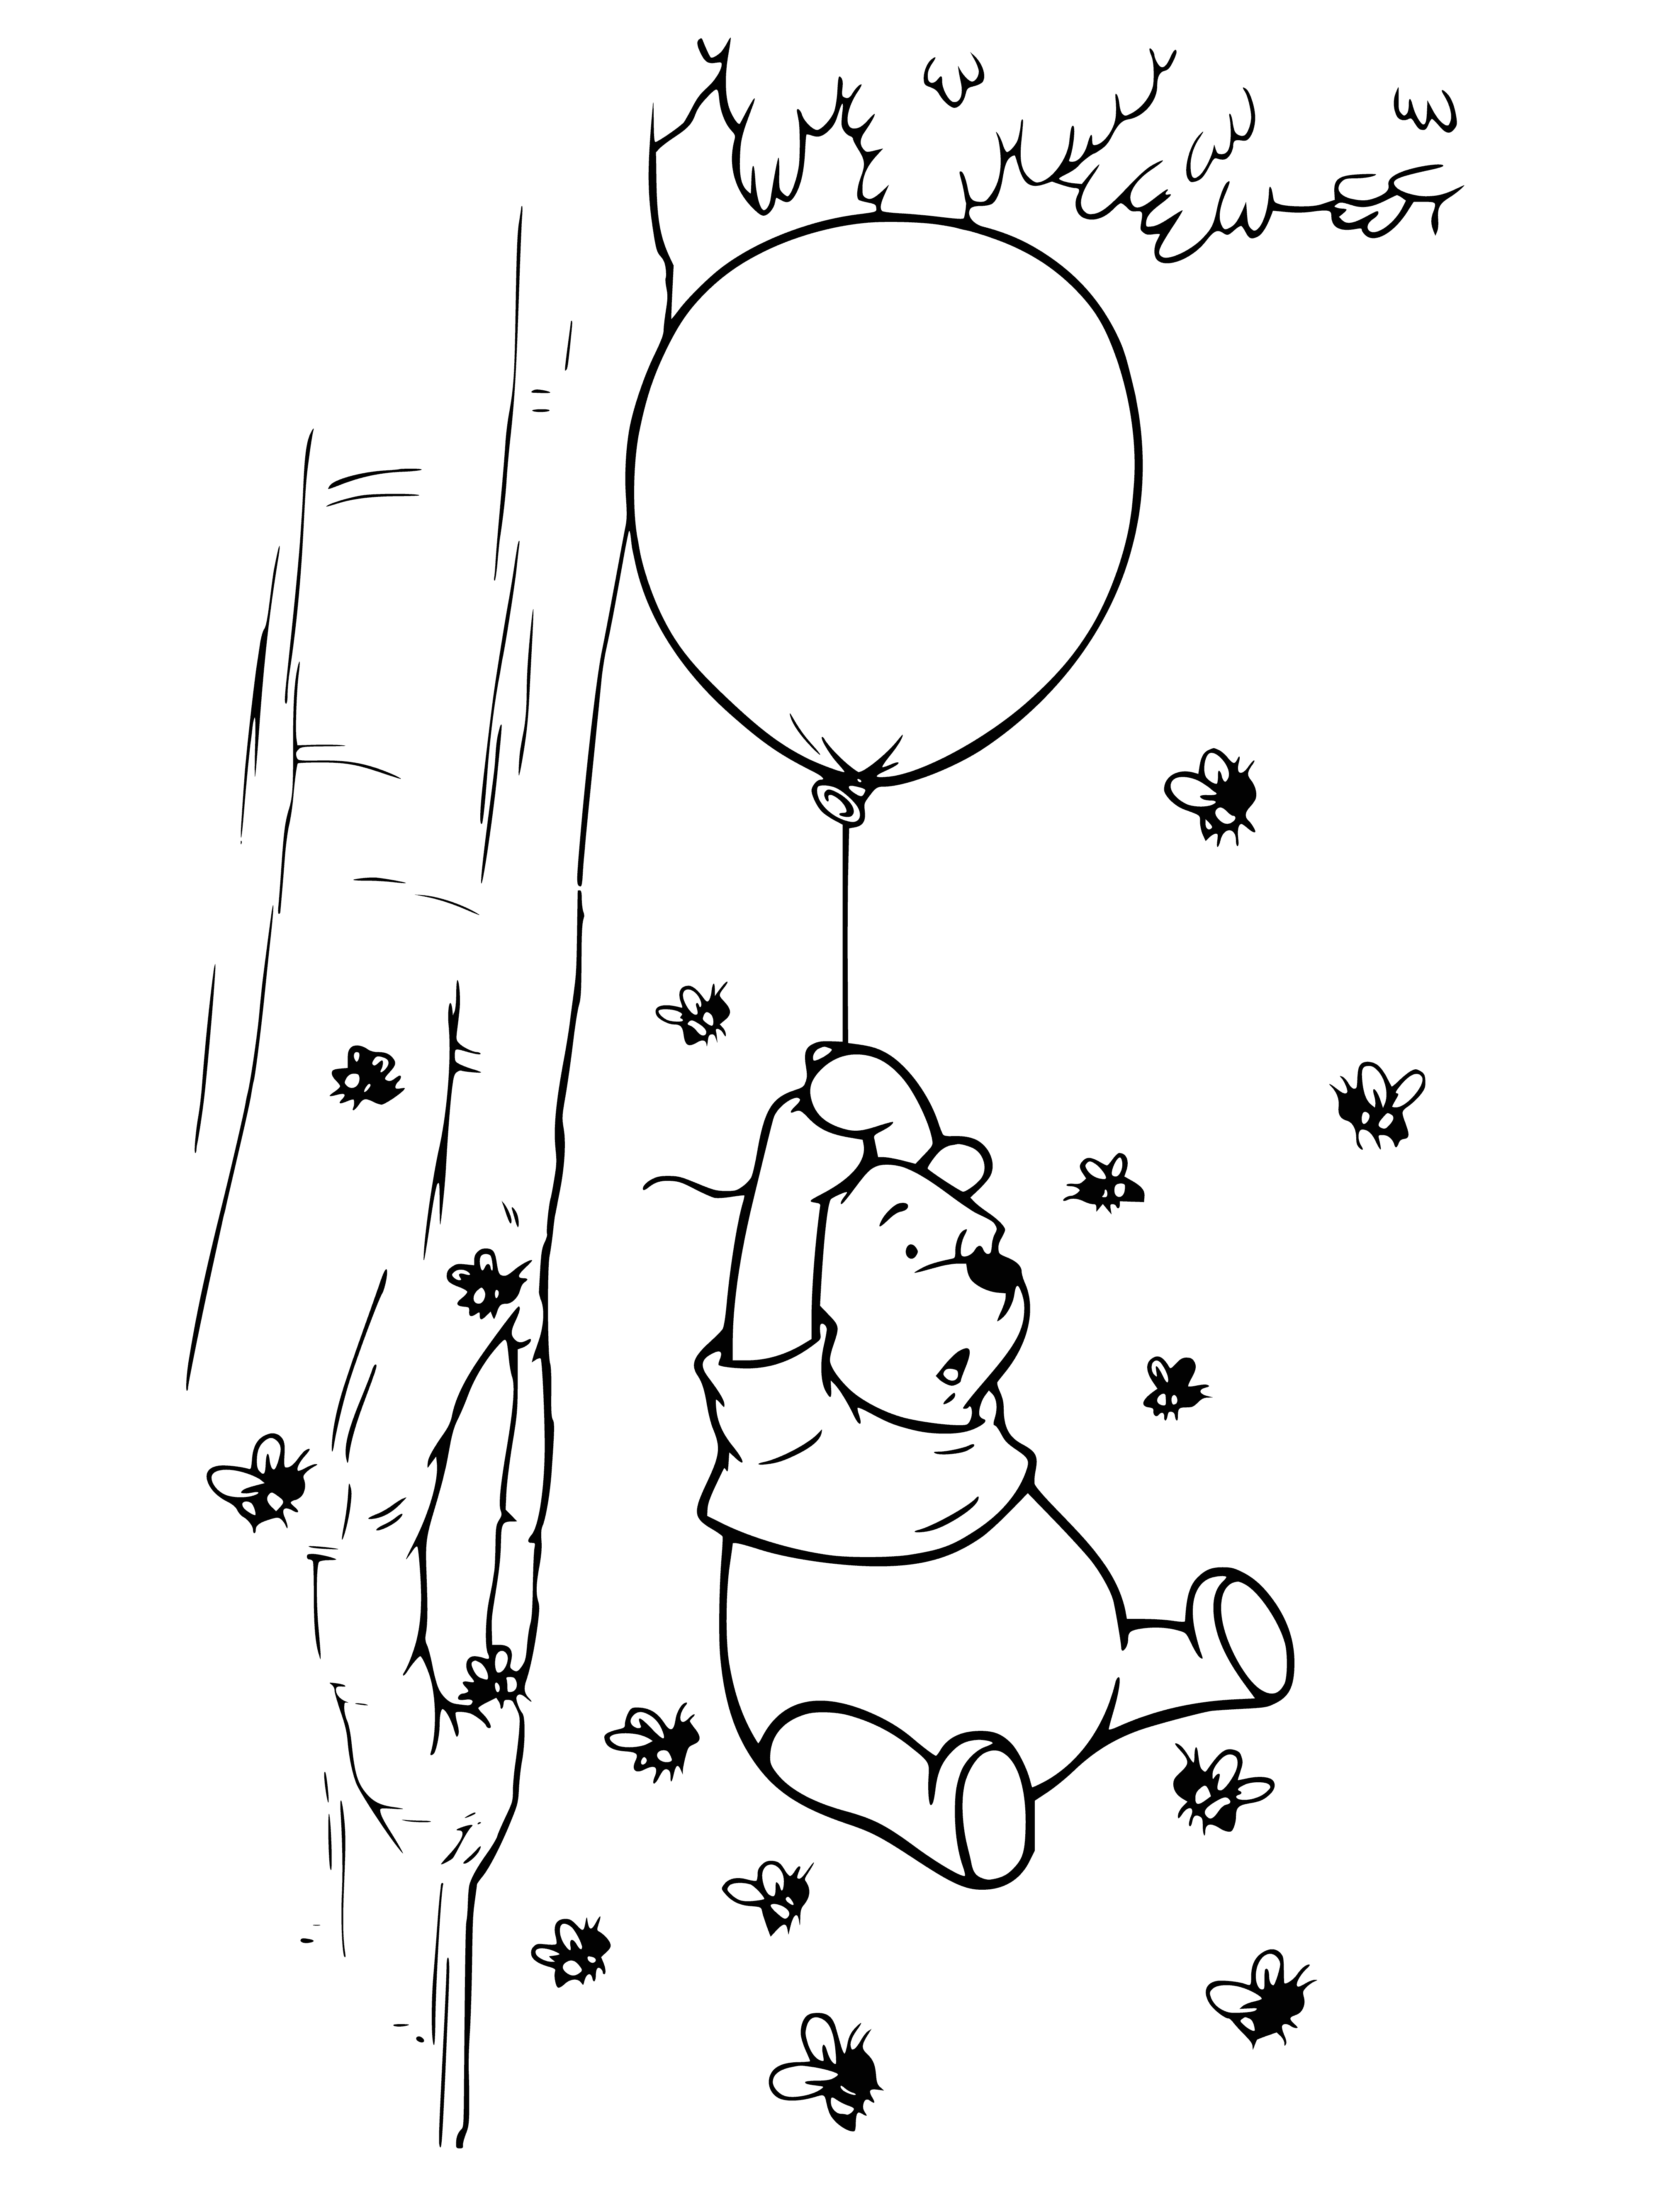 coloring page: Winnie the Pooh in hot air balloon: red & yellow, holding strings, blue sky.